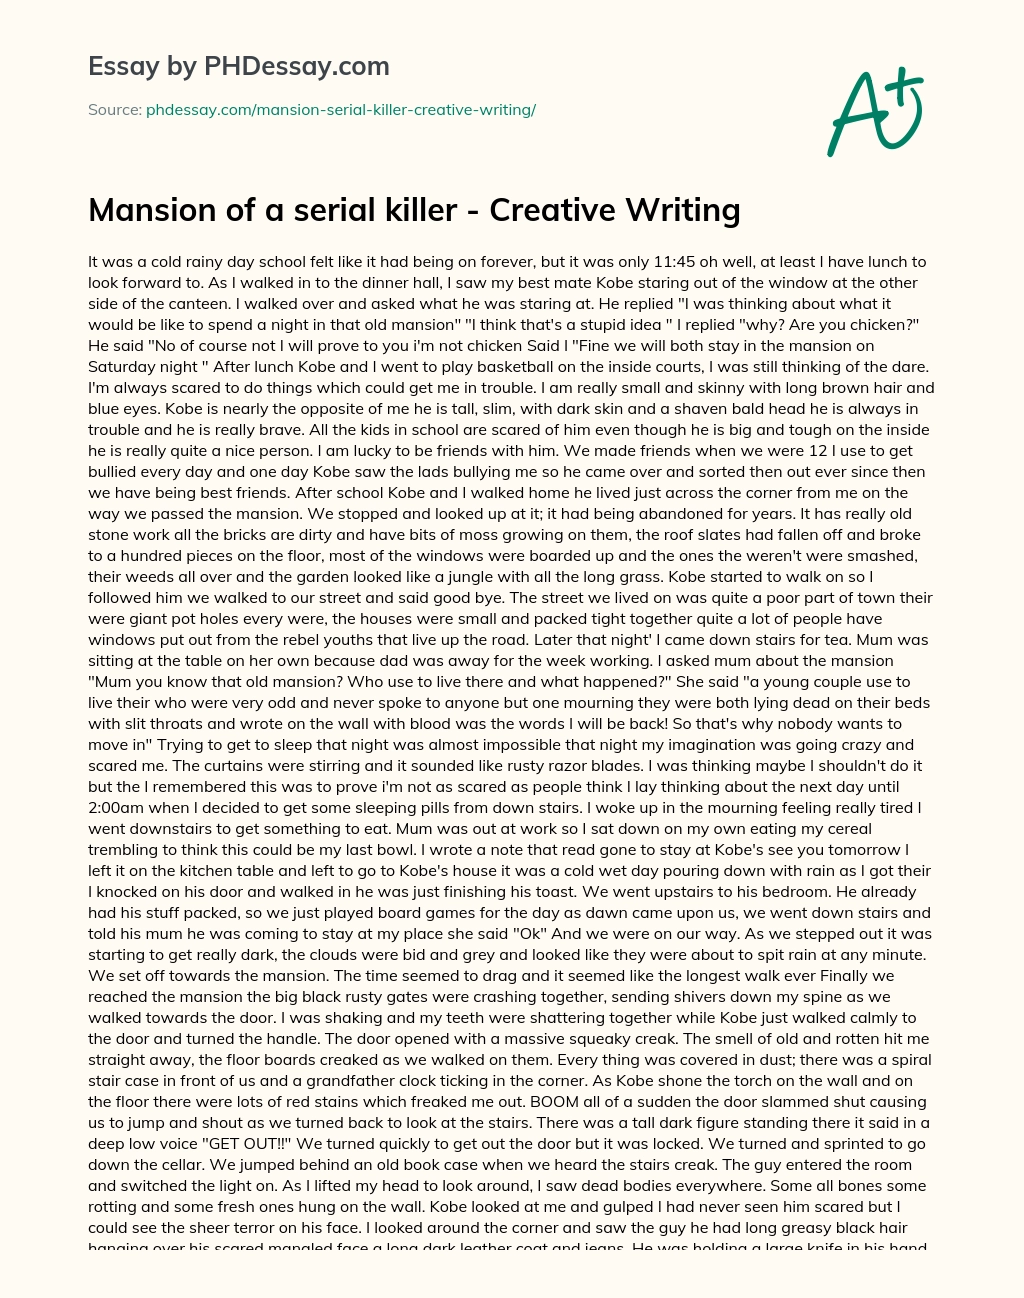 Mansion of a serial killer – Creative Writing essay